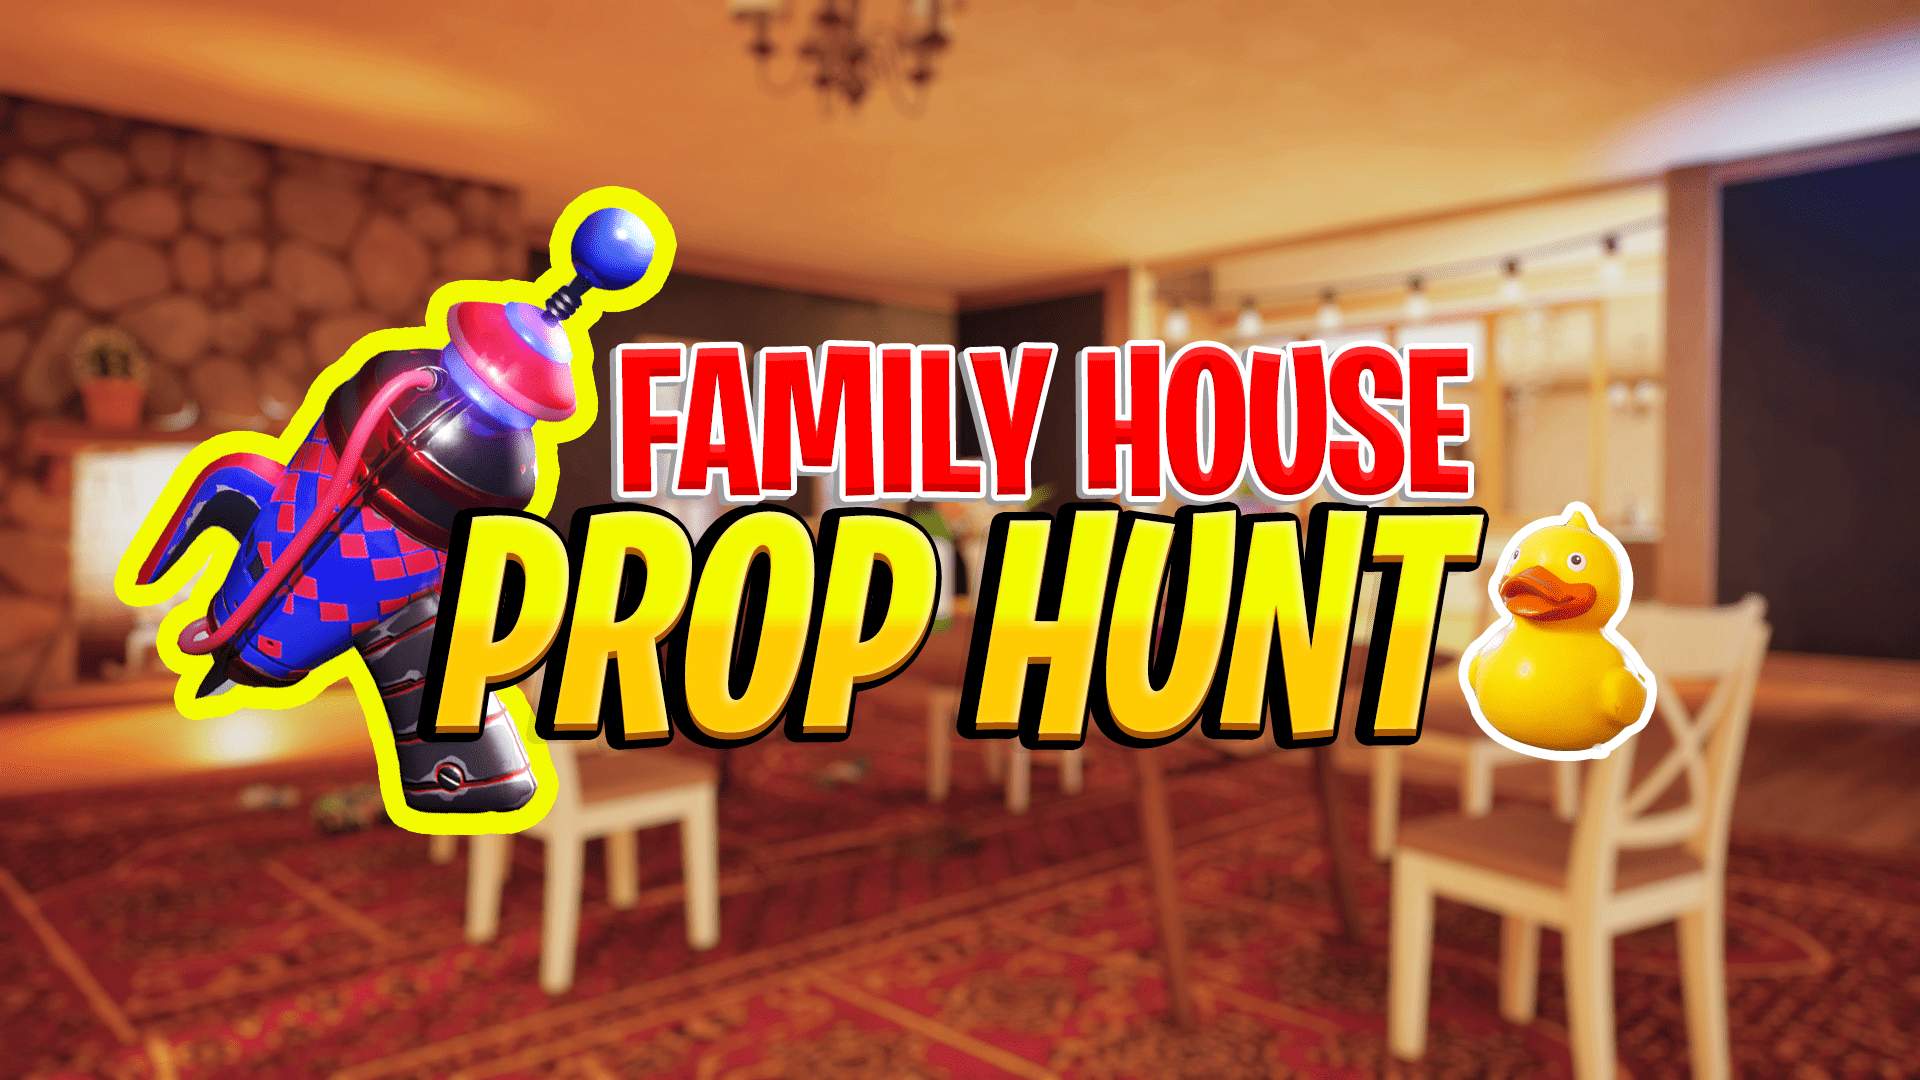 PROP HUNT - FAMILY HOUSE 🏠